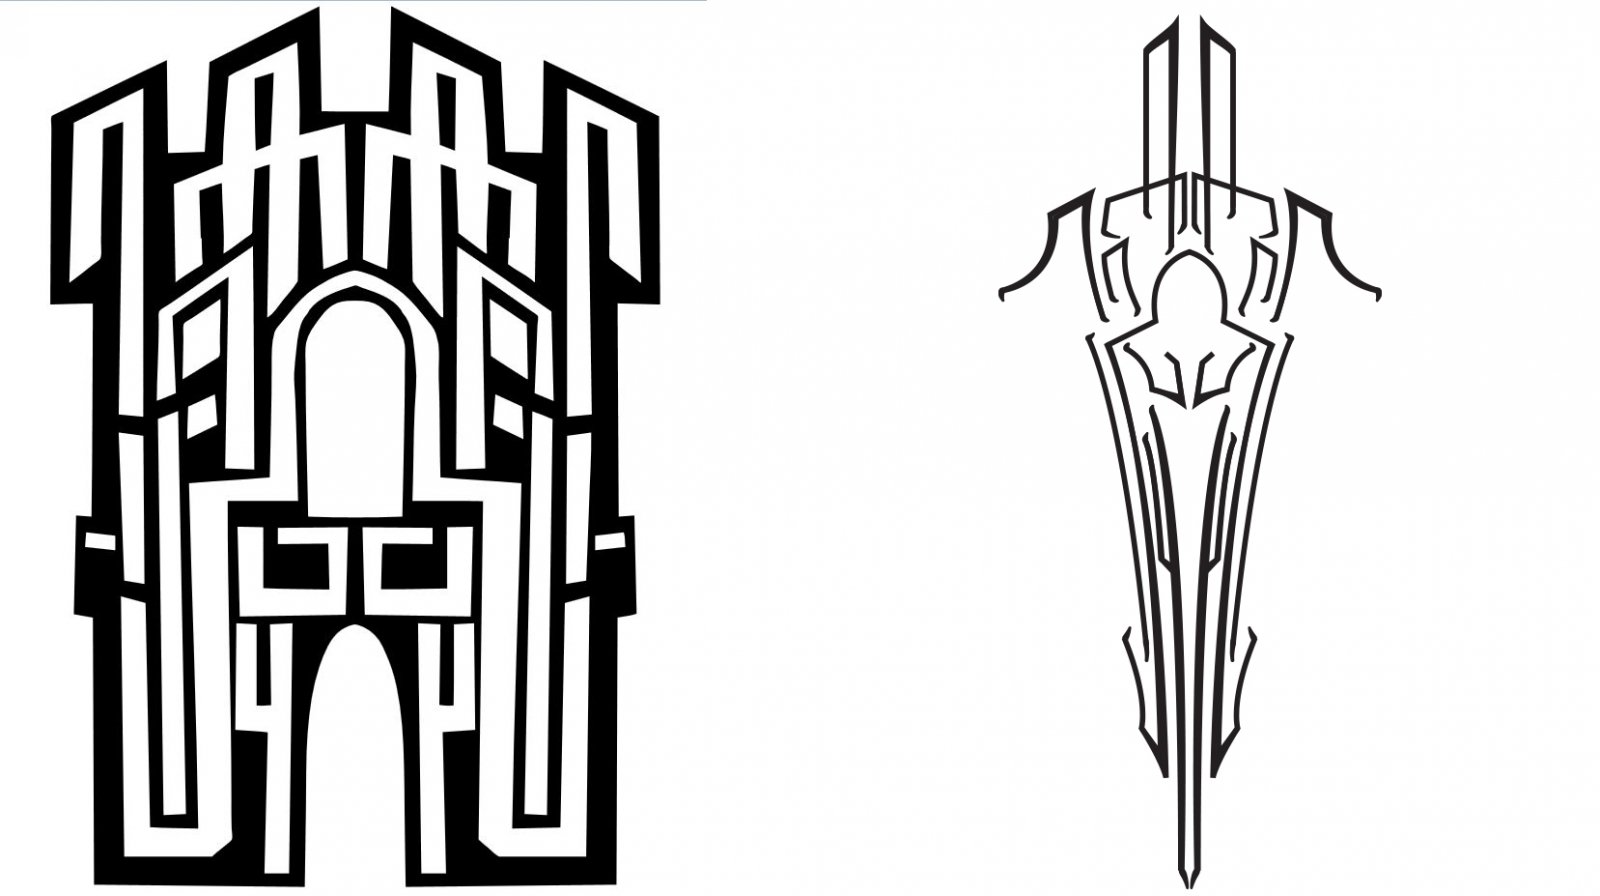 linil stylised in the shape of a sword.jpg